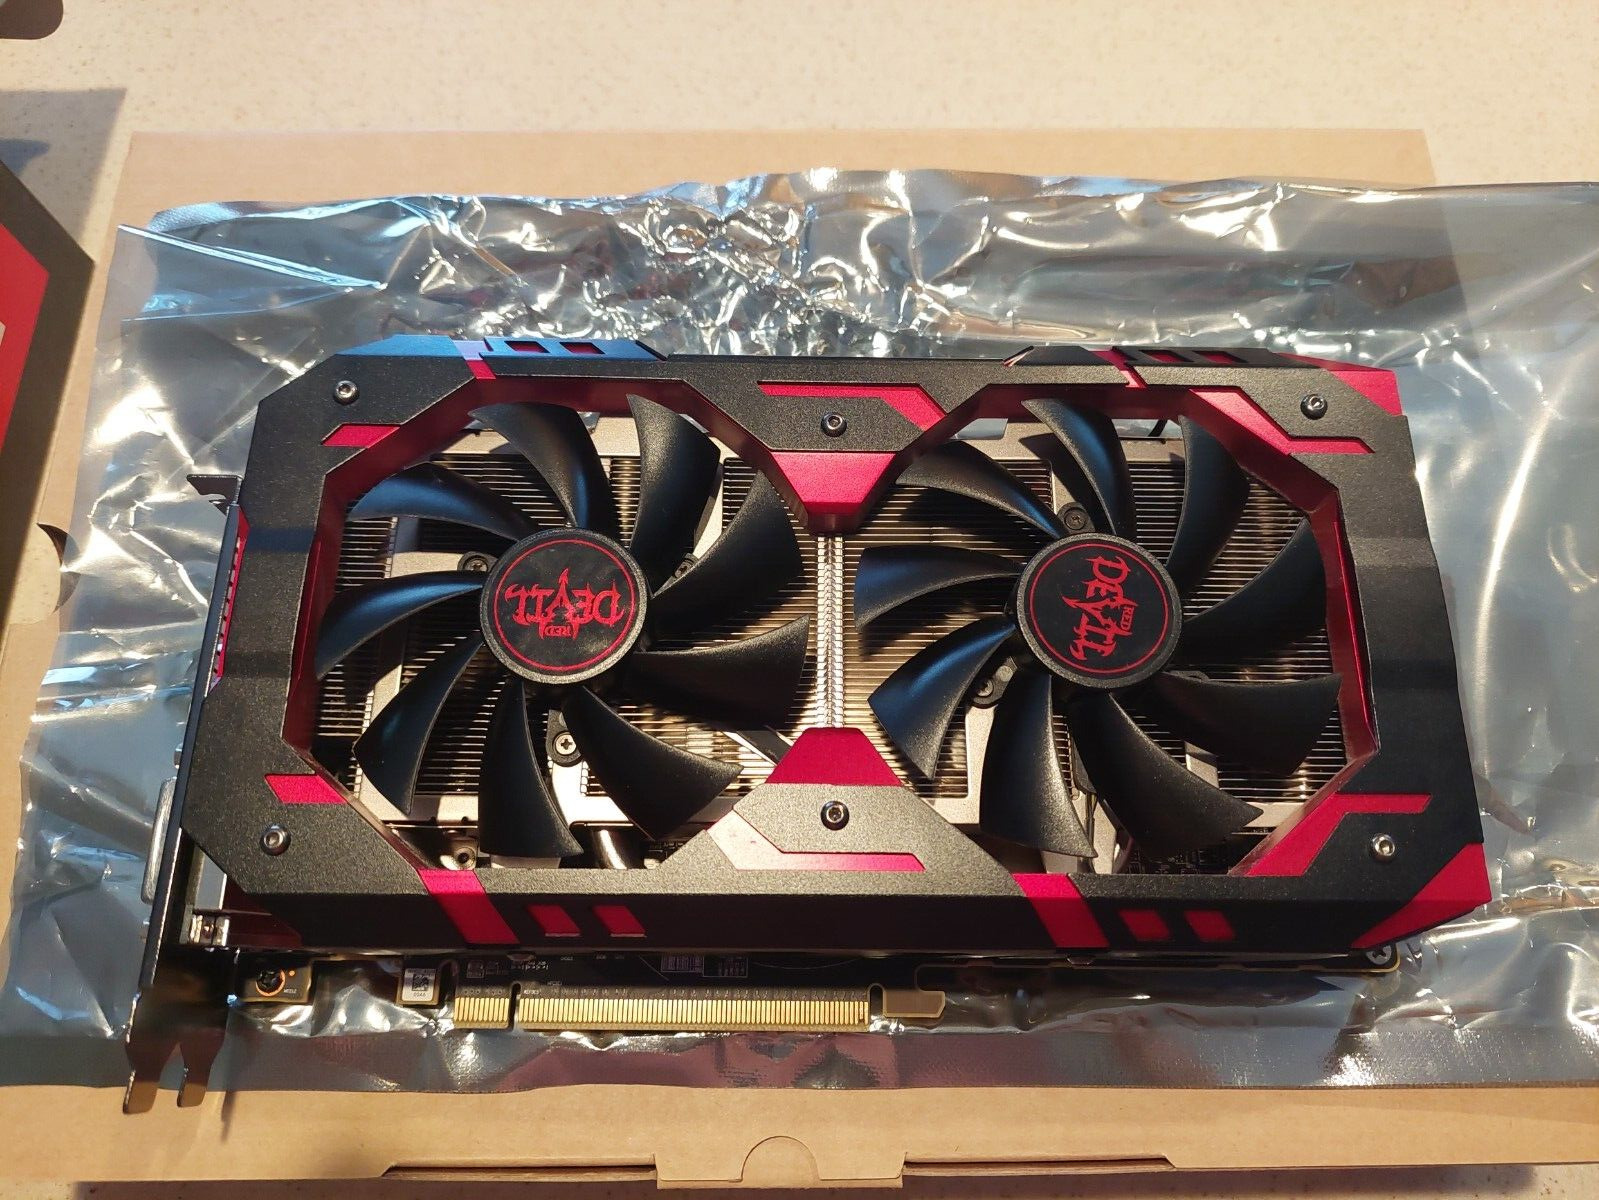 PowerColor Red Devil Radeon RX 580 8gb GDDR5 (Pre-owned) - Very Good Condition